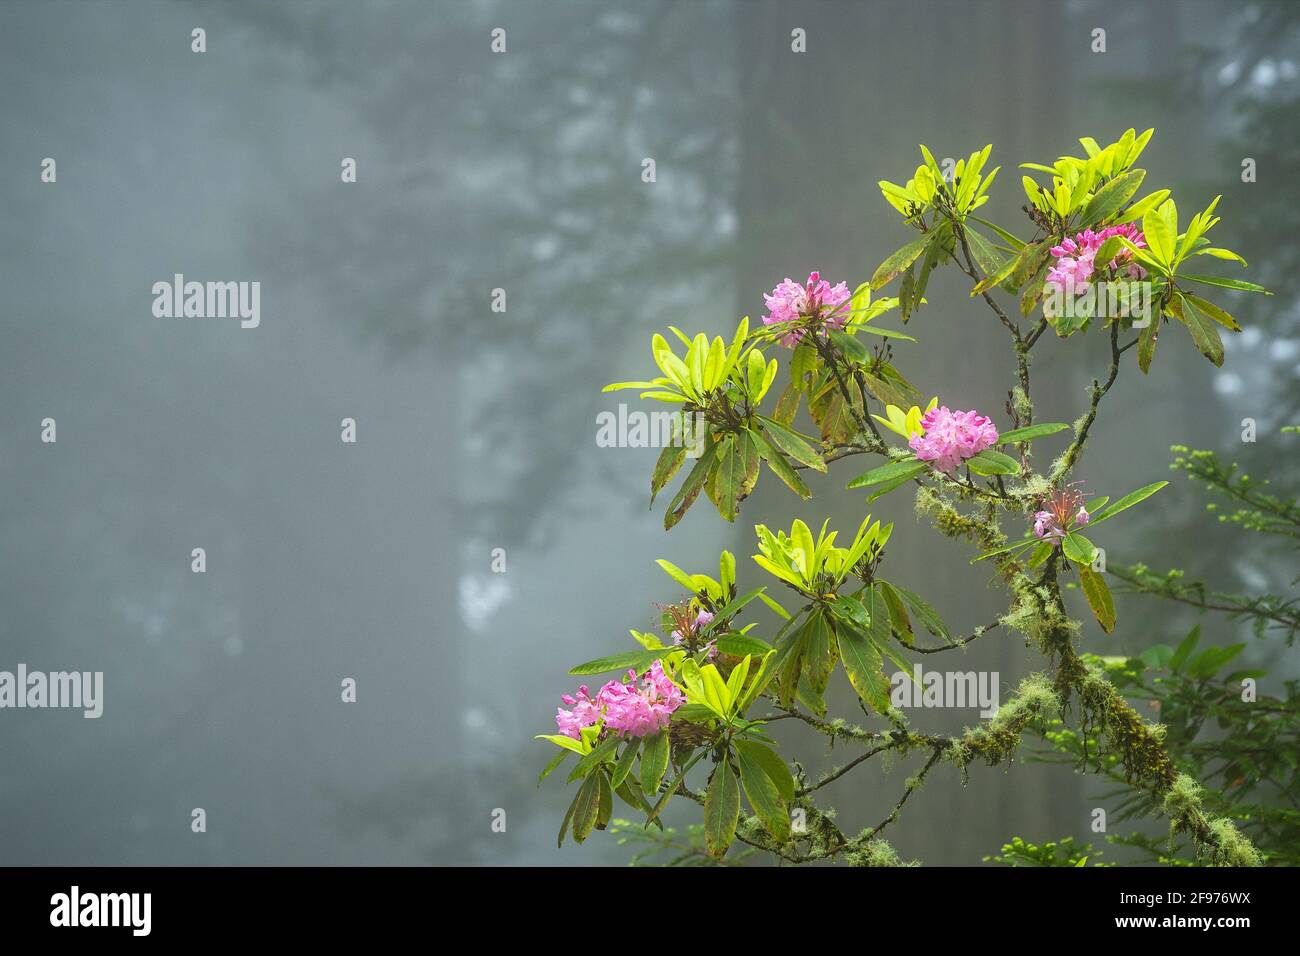 Rododendron fiorisce nella nebbia, del Norte Redwoods state Park, Redwoods state and National Parks, Calfornia. Foto Stock